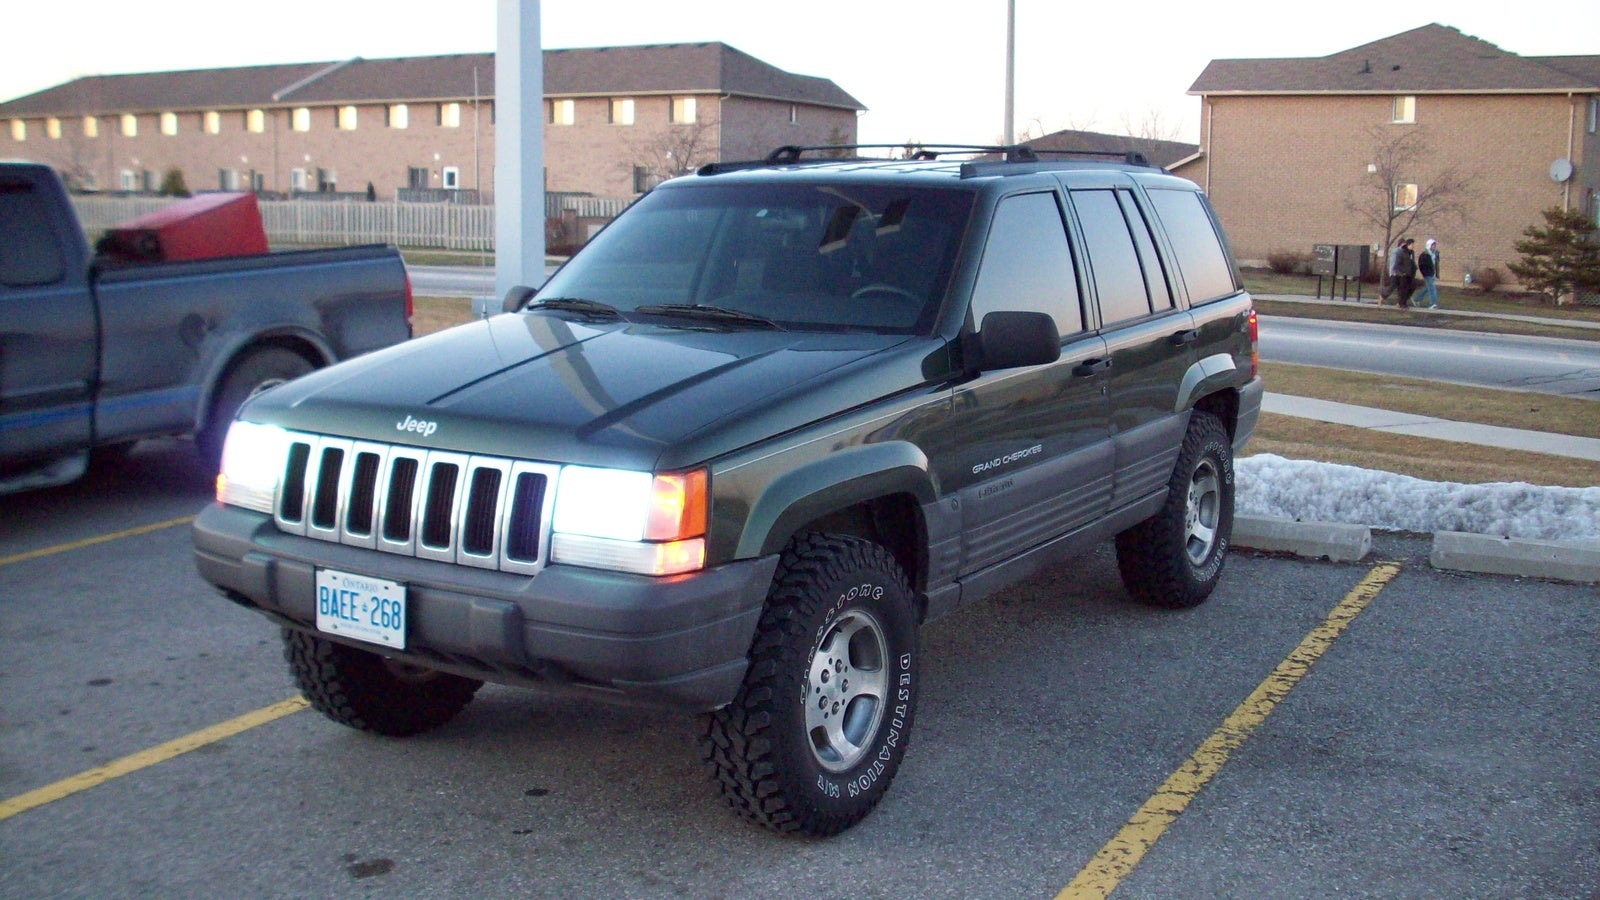 1996 Jeep grand cherokee limited tire specs #2